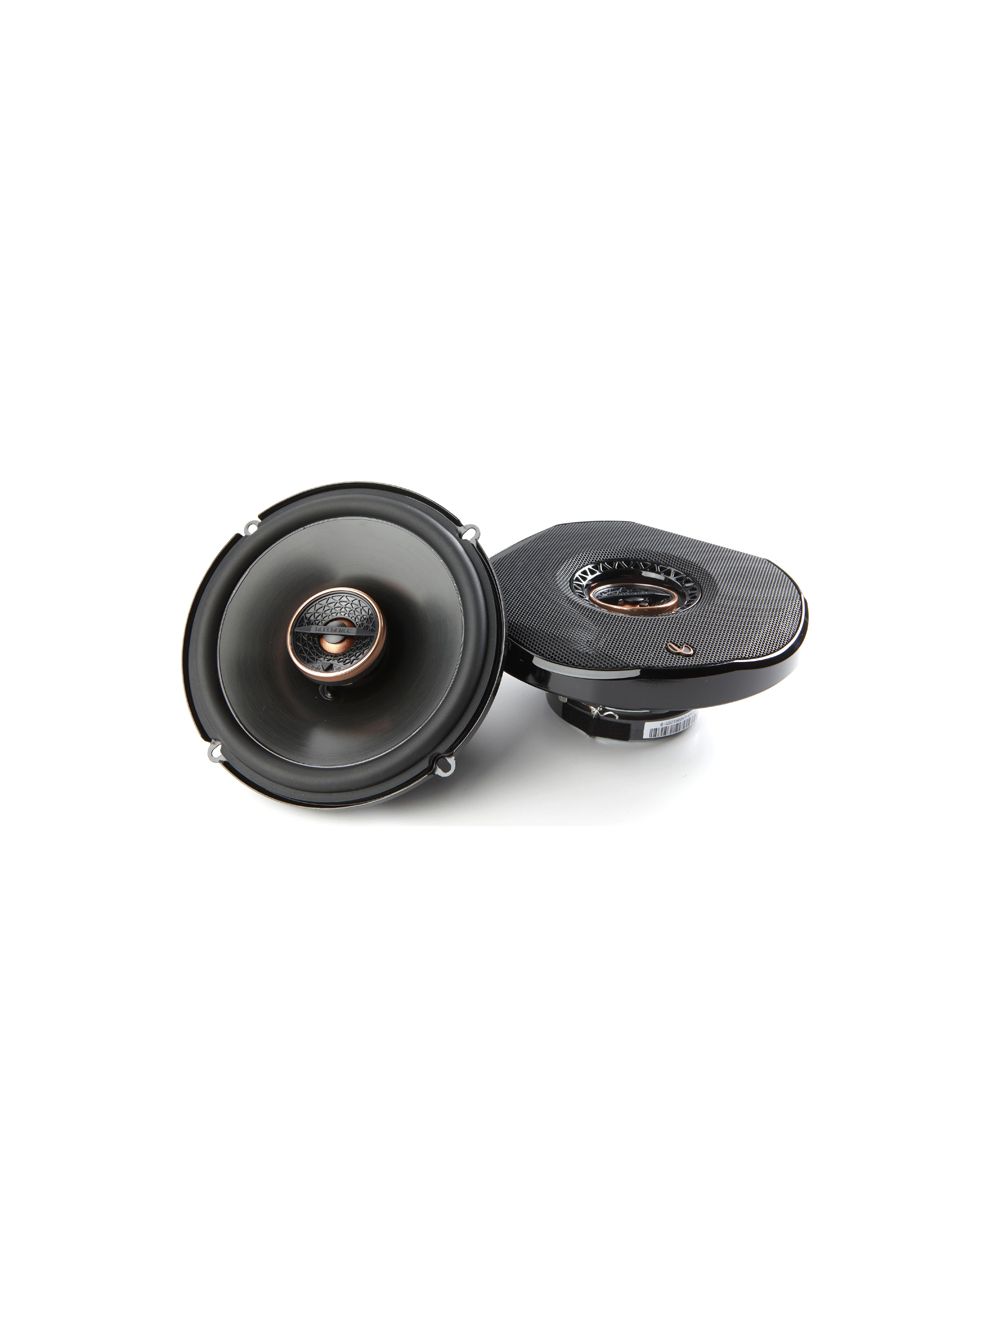 Car Speaker Size Replacement fits 2003-2006 for Hyundai Santa Fe without Monsoon system (not amplified)